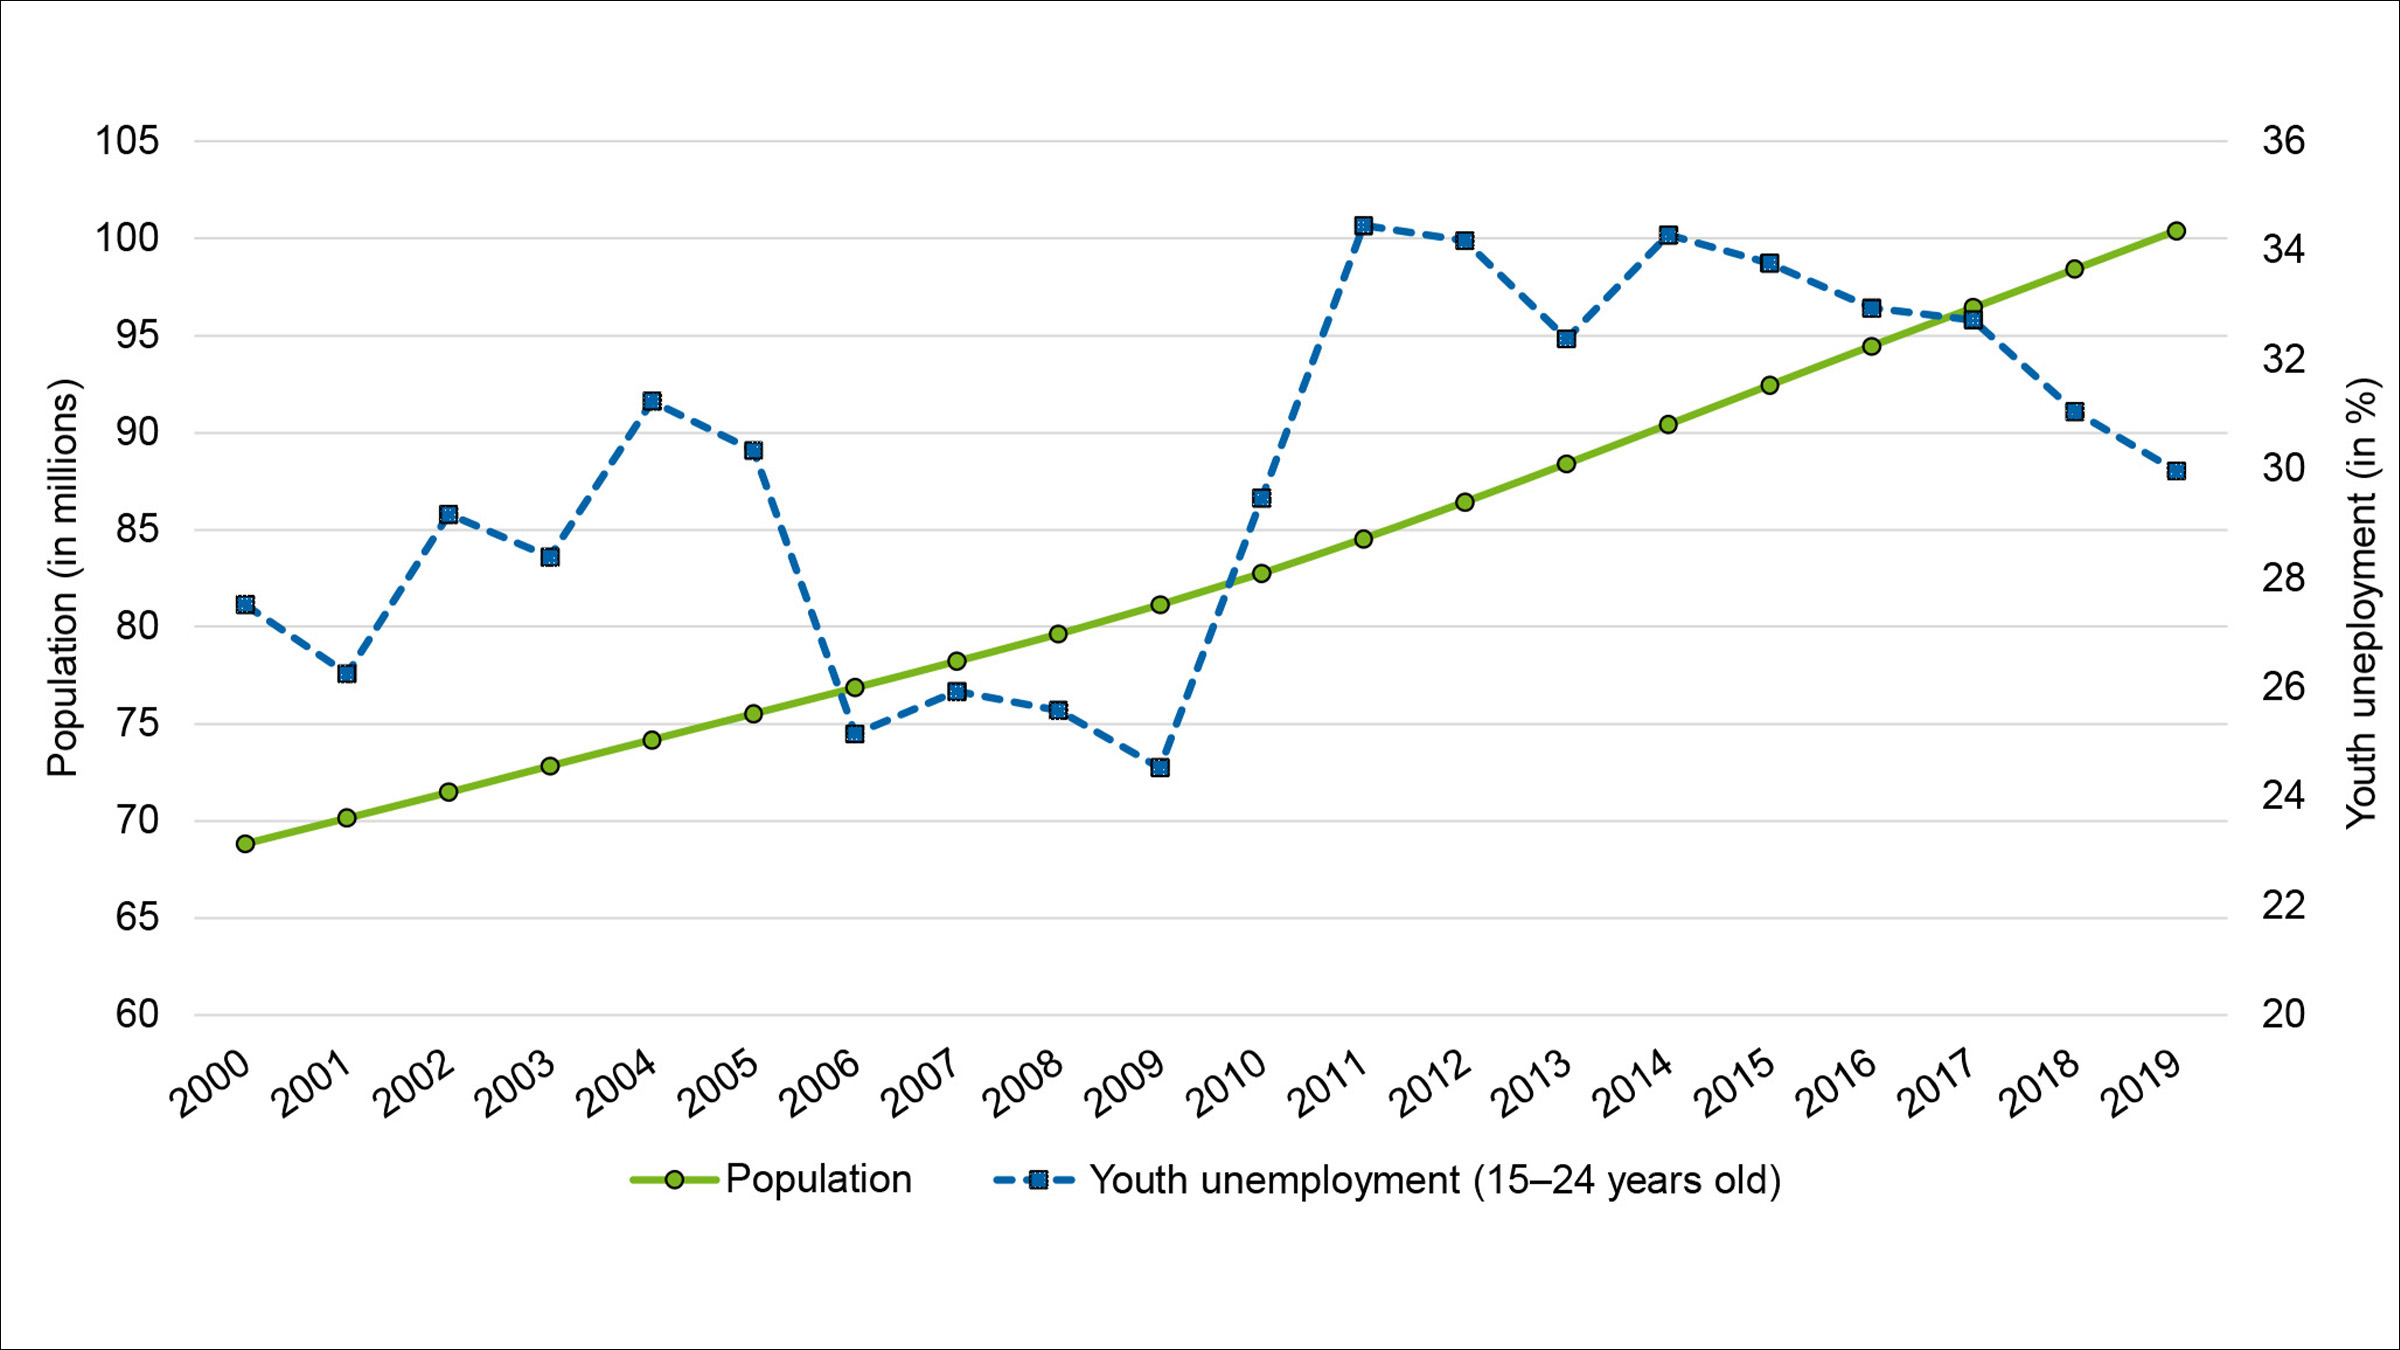 Graphic about Population and Youth Unemployment in Egypt, 2000–2019